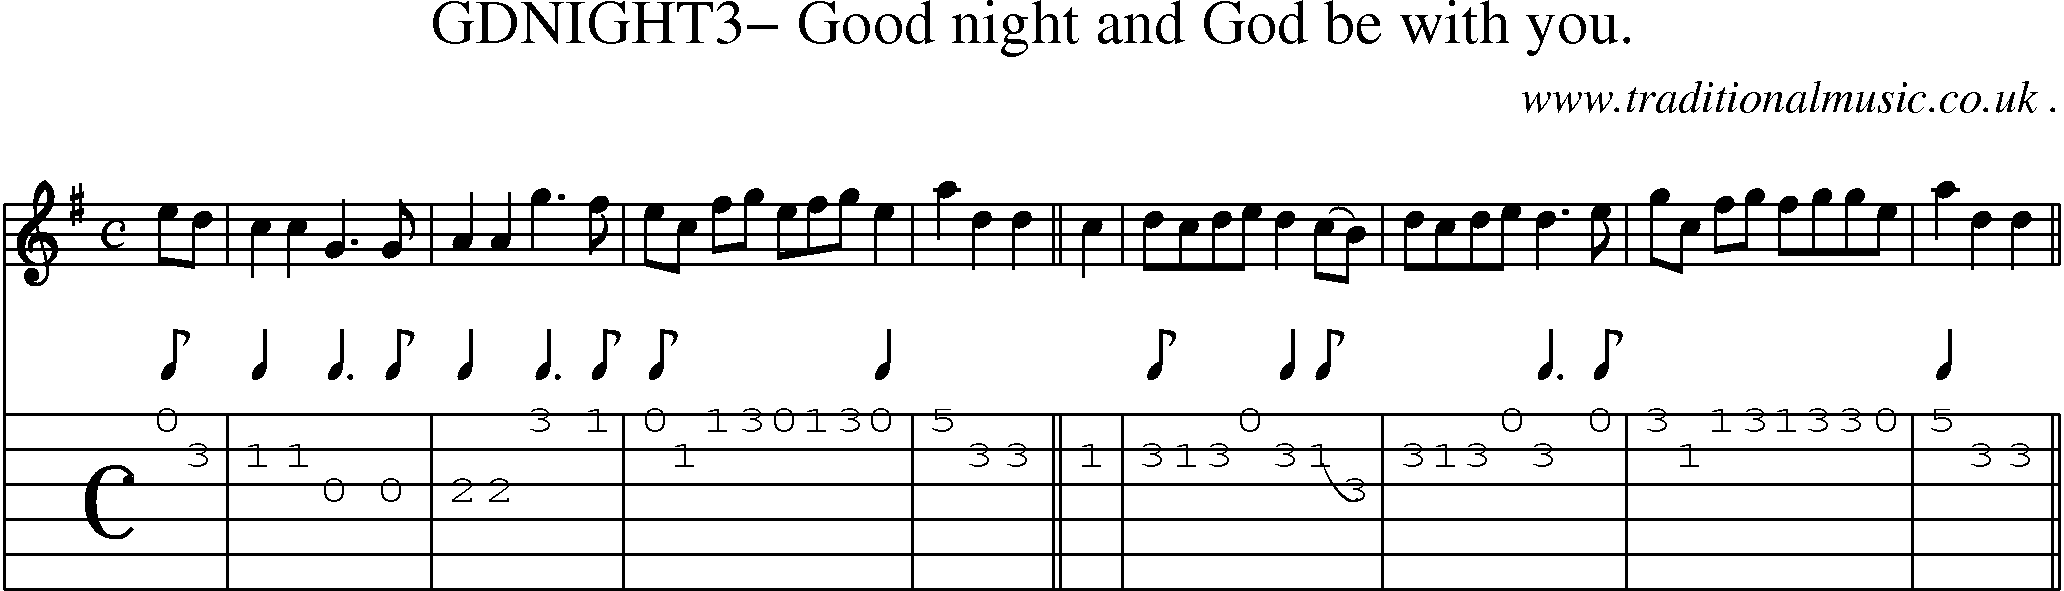 Sheet-Music and Guitar Tabs for Gdnight3 Good Night And God Be With You